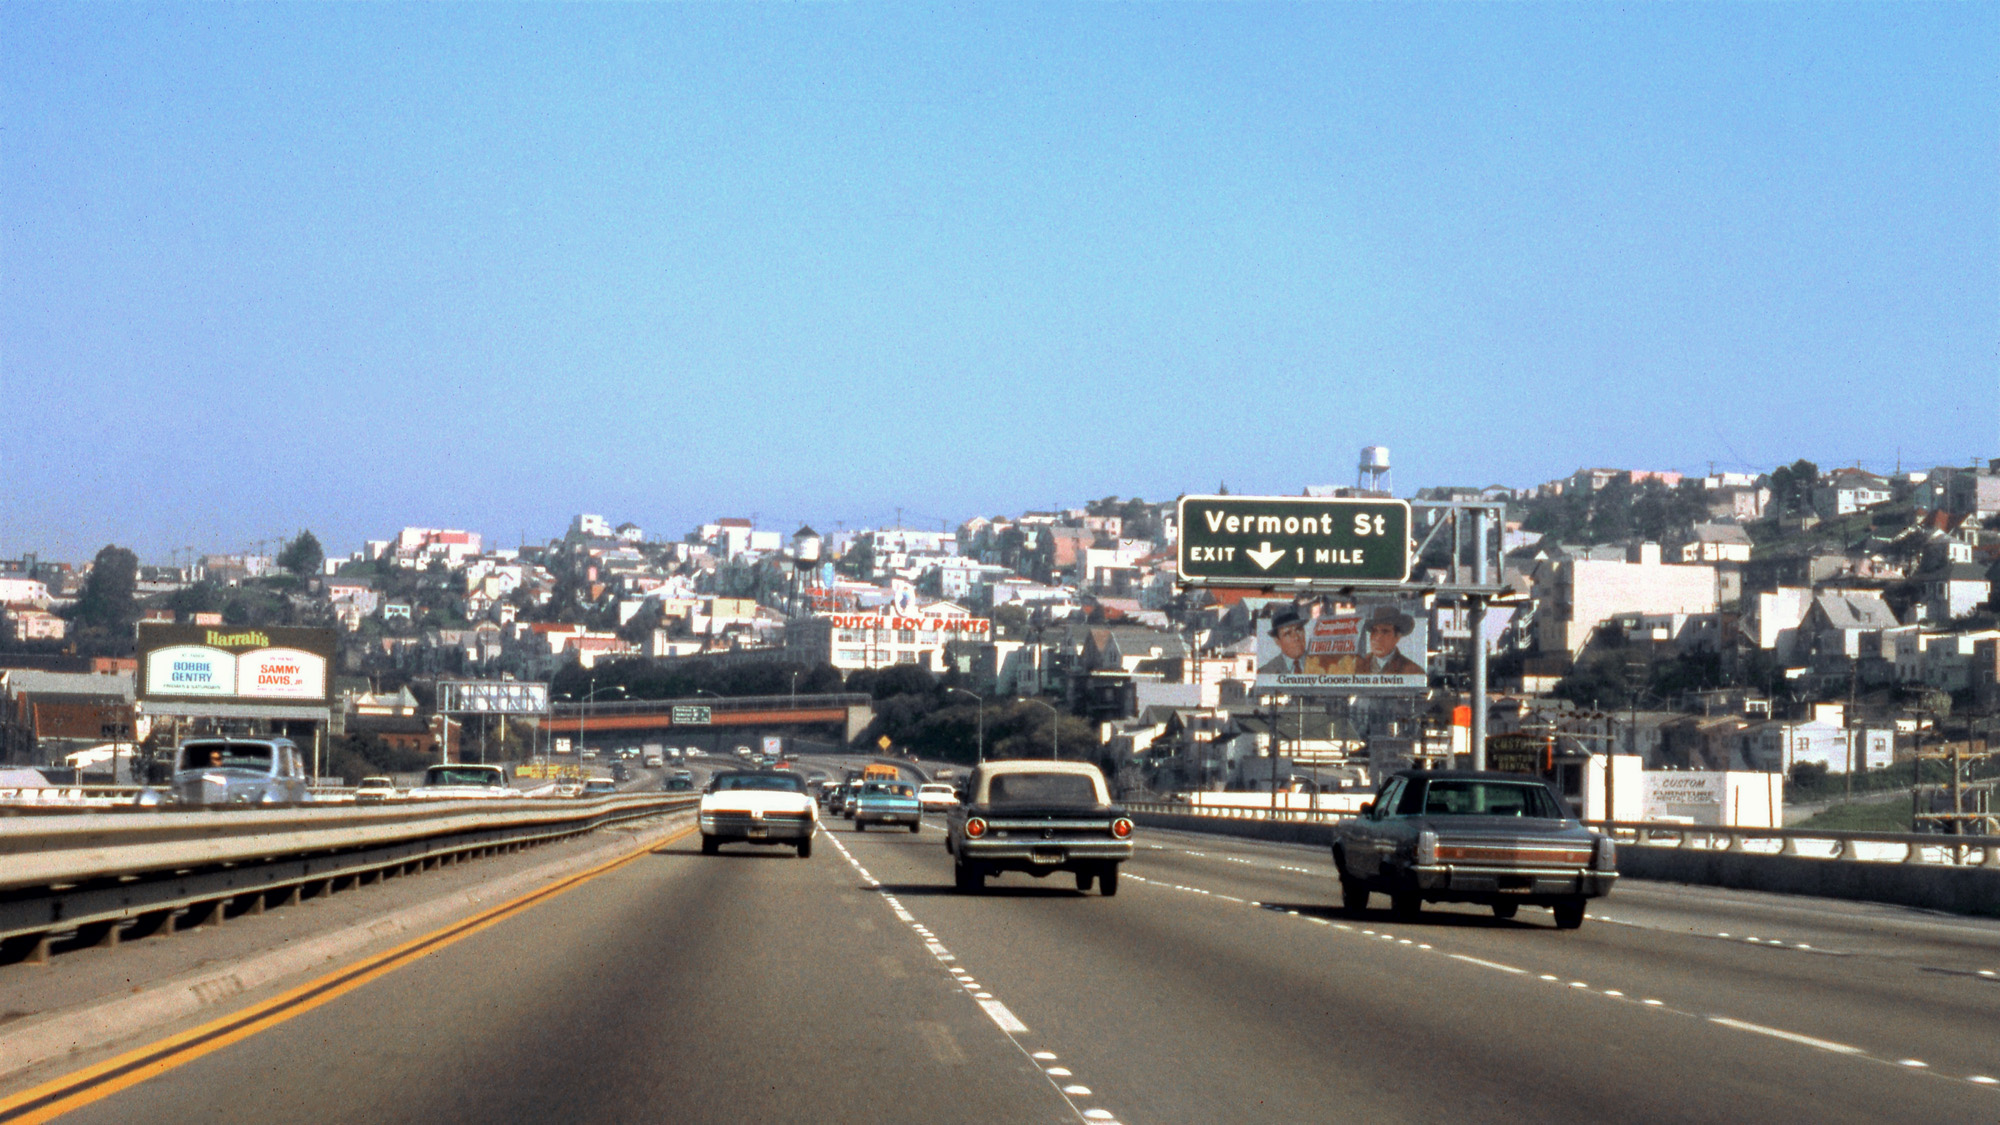 San Francisco, March 1969. Taken from the front passenger seat, US 101 northbound at the Vermont Street exit. Love the Bobbie Gentry and Sammy Davis Jr. Harrah's billboard and the late 1950s Bentley cruising serenely in the southbound lane. View full size.